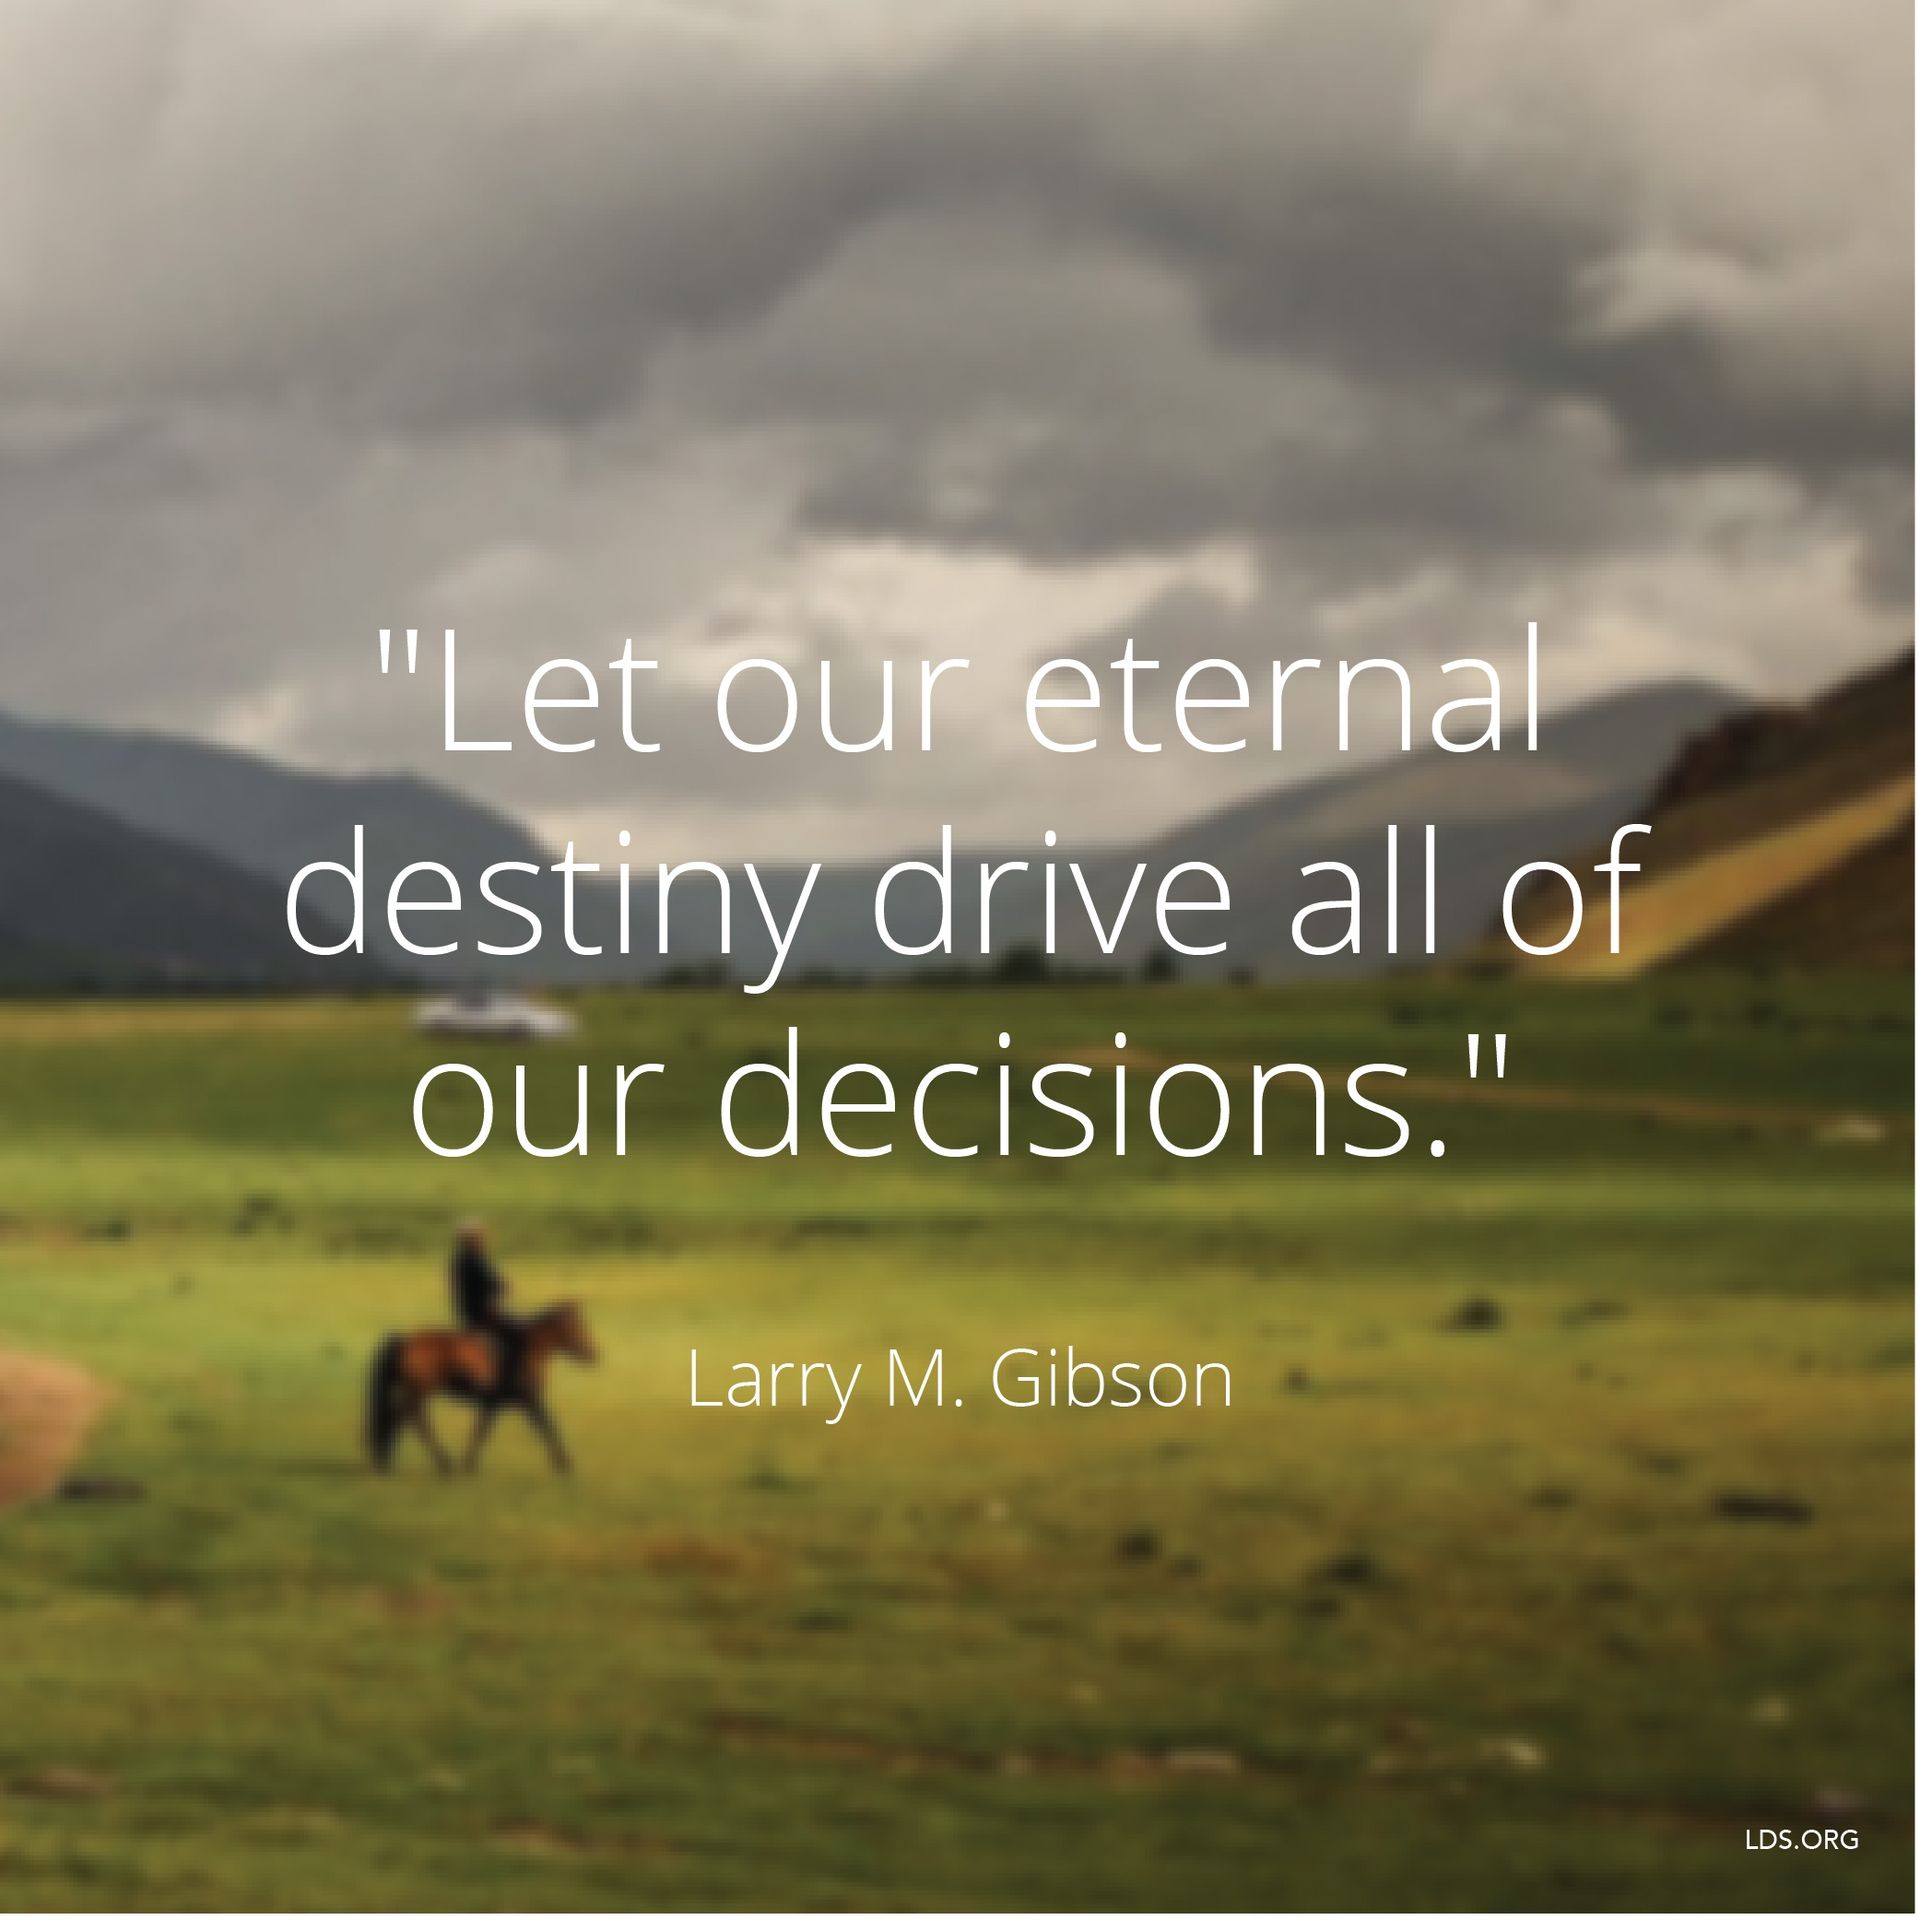 “Let our eternal destiny drive all of our decisions.”—Brother Larry M. Gibson, “Fatherhood—Our Eternal Destiny” © undefined ipCode 1.